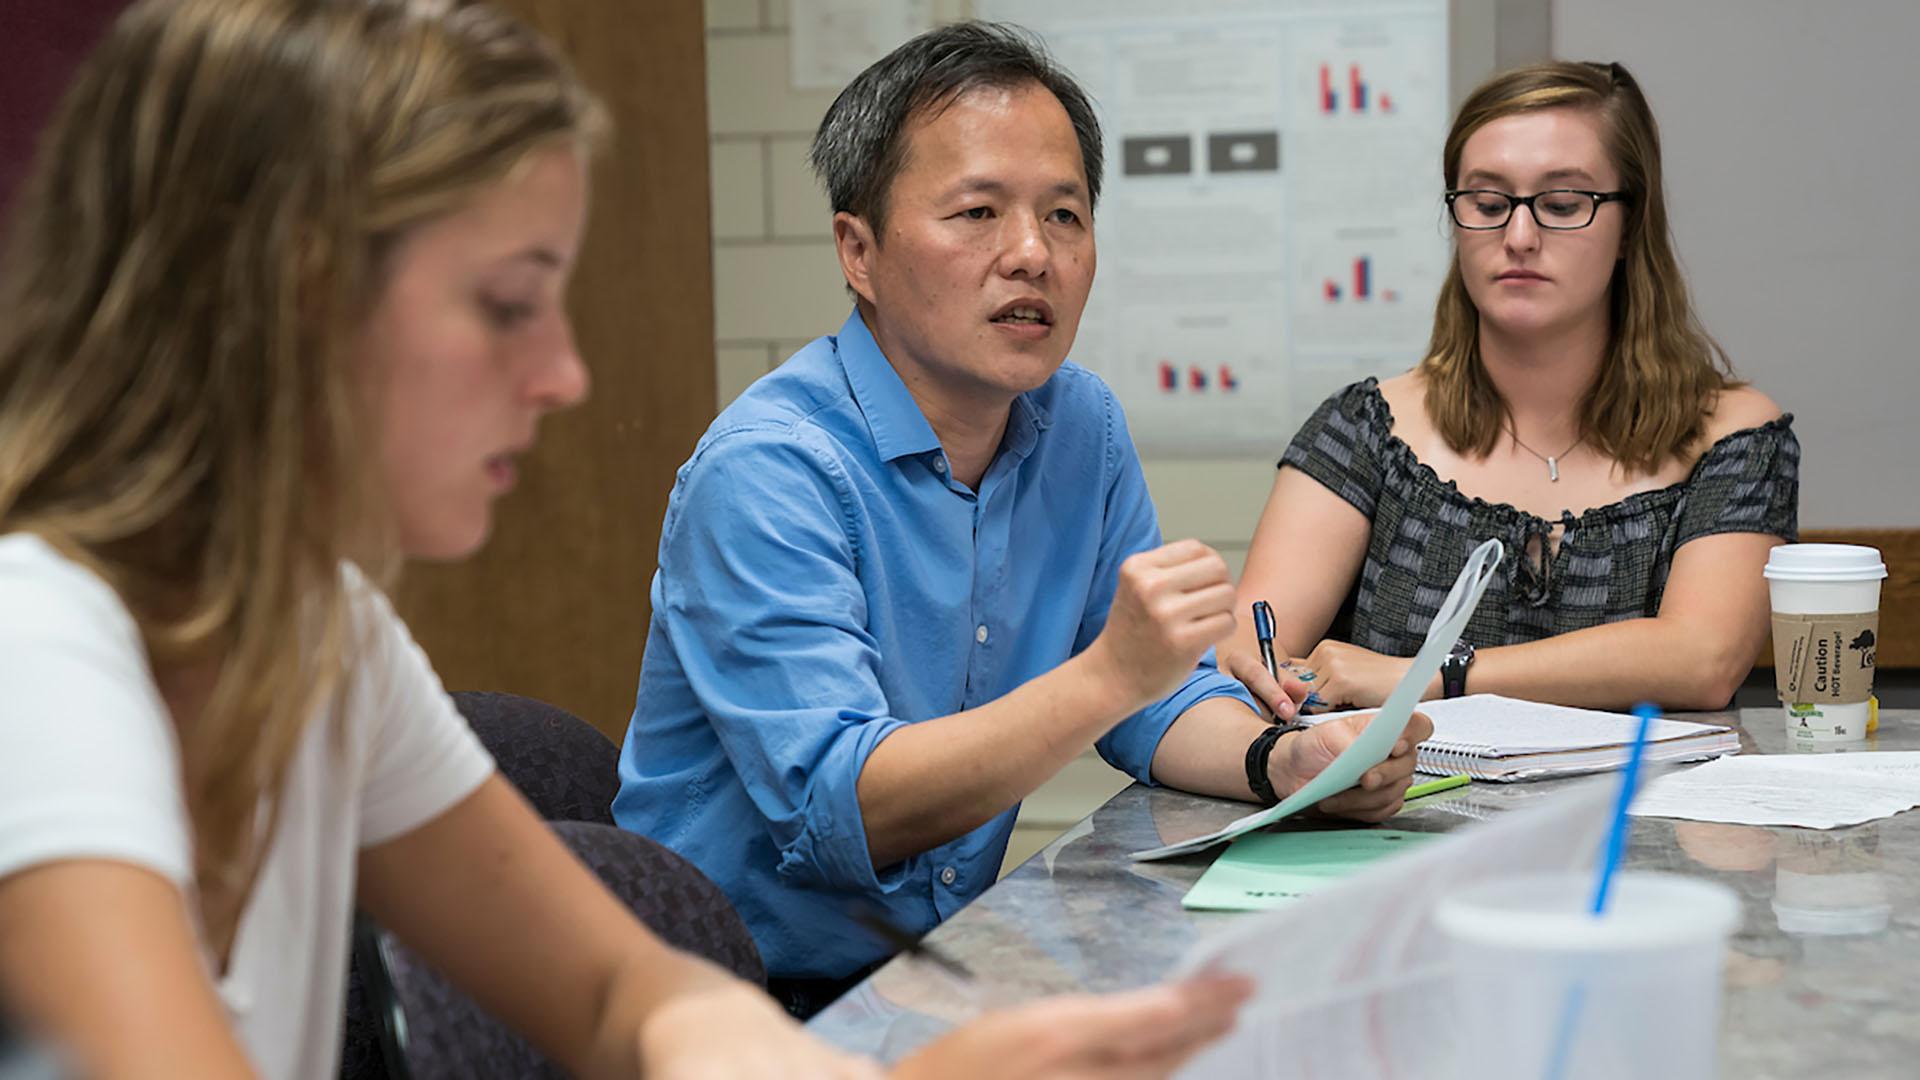 Professor Wan-Chun Liu speaks with a small group of students at a table.